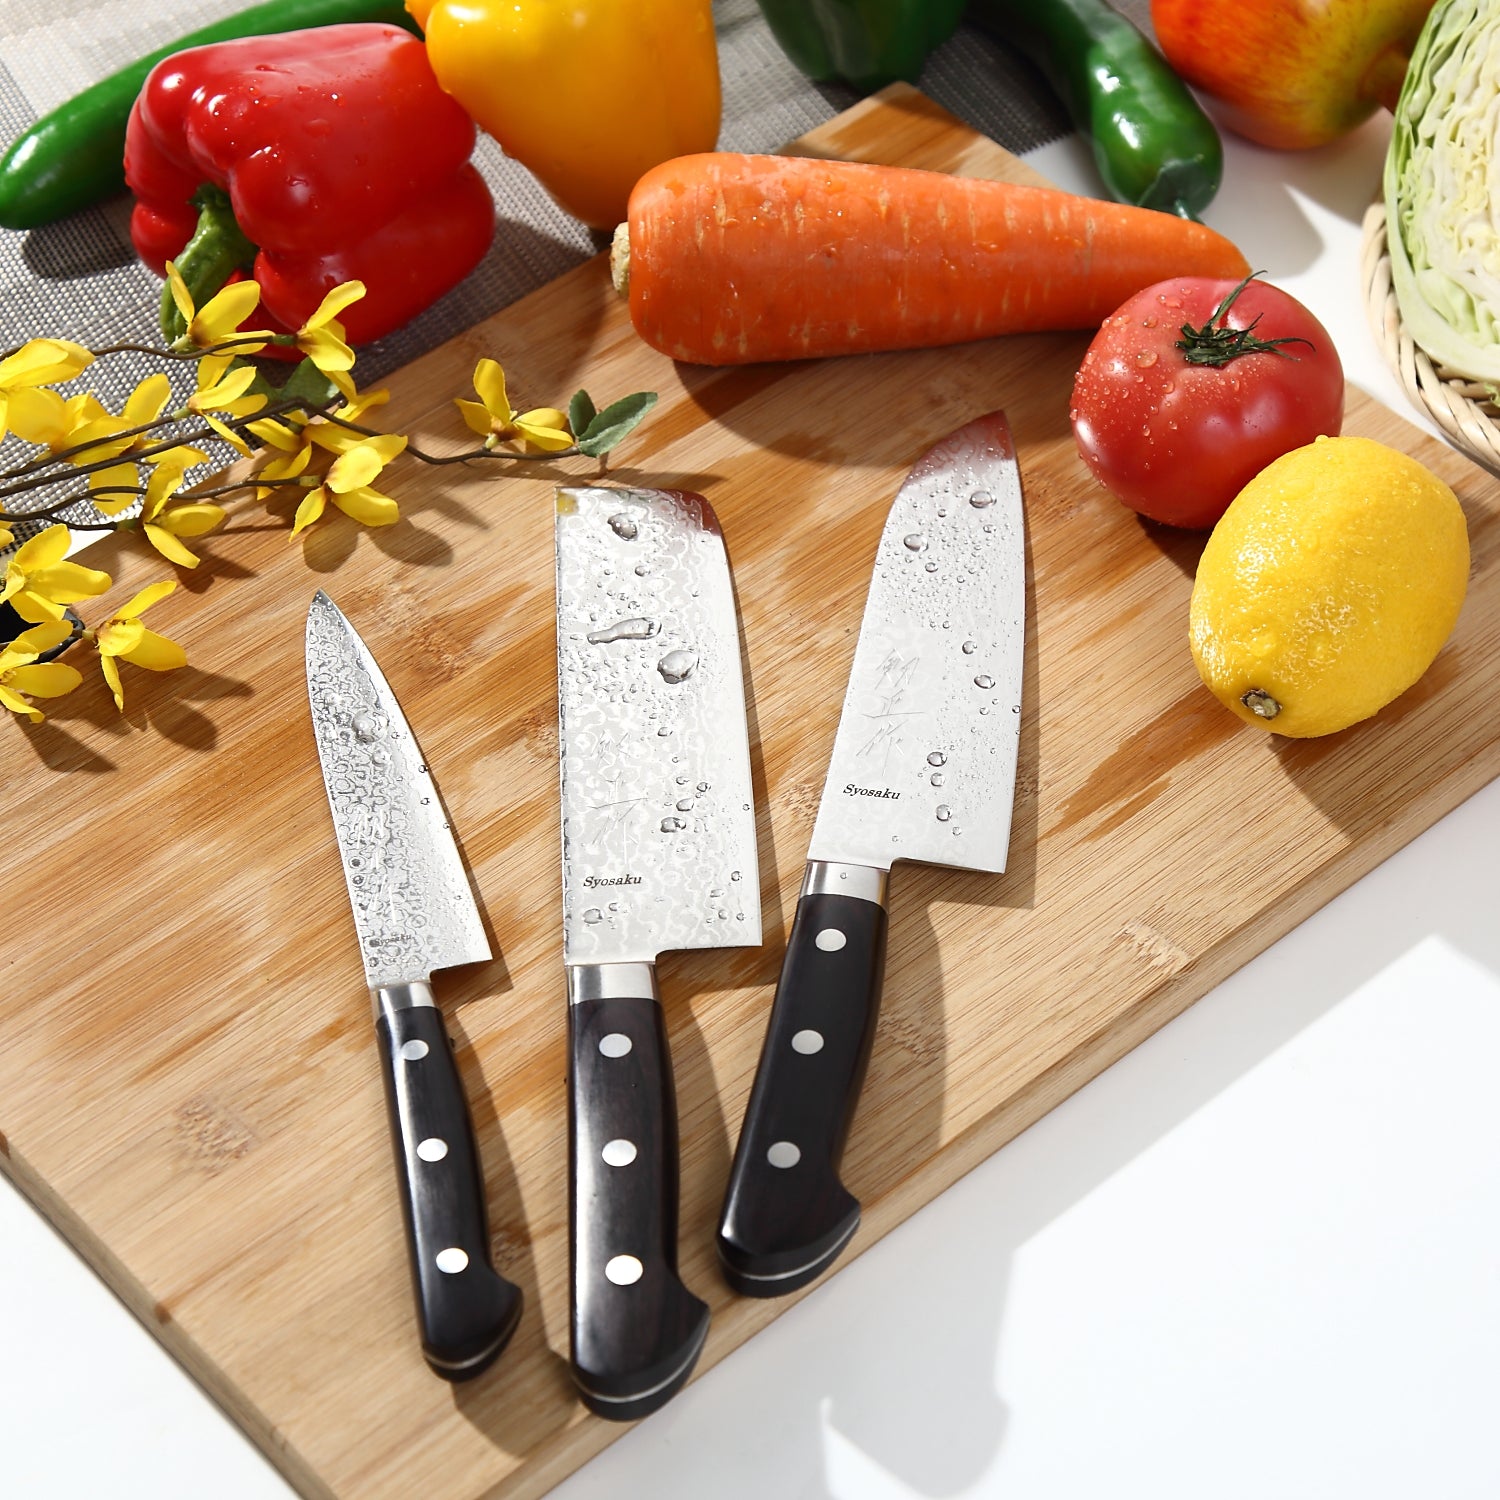 The Best High Carbon Steel Vegetable Cleaver According to Cooking Experts -  Best Damascus Chef's Knives